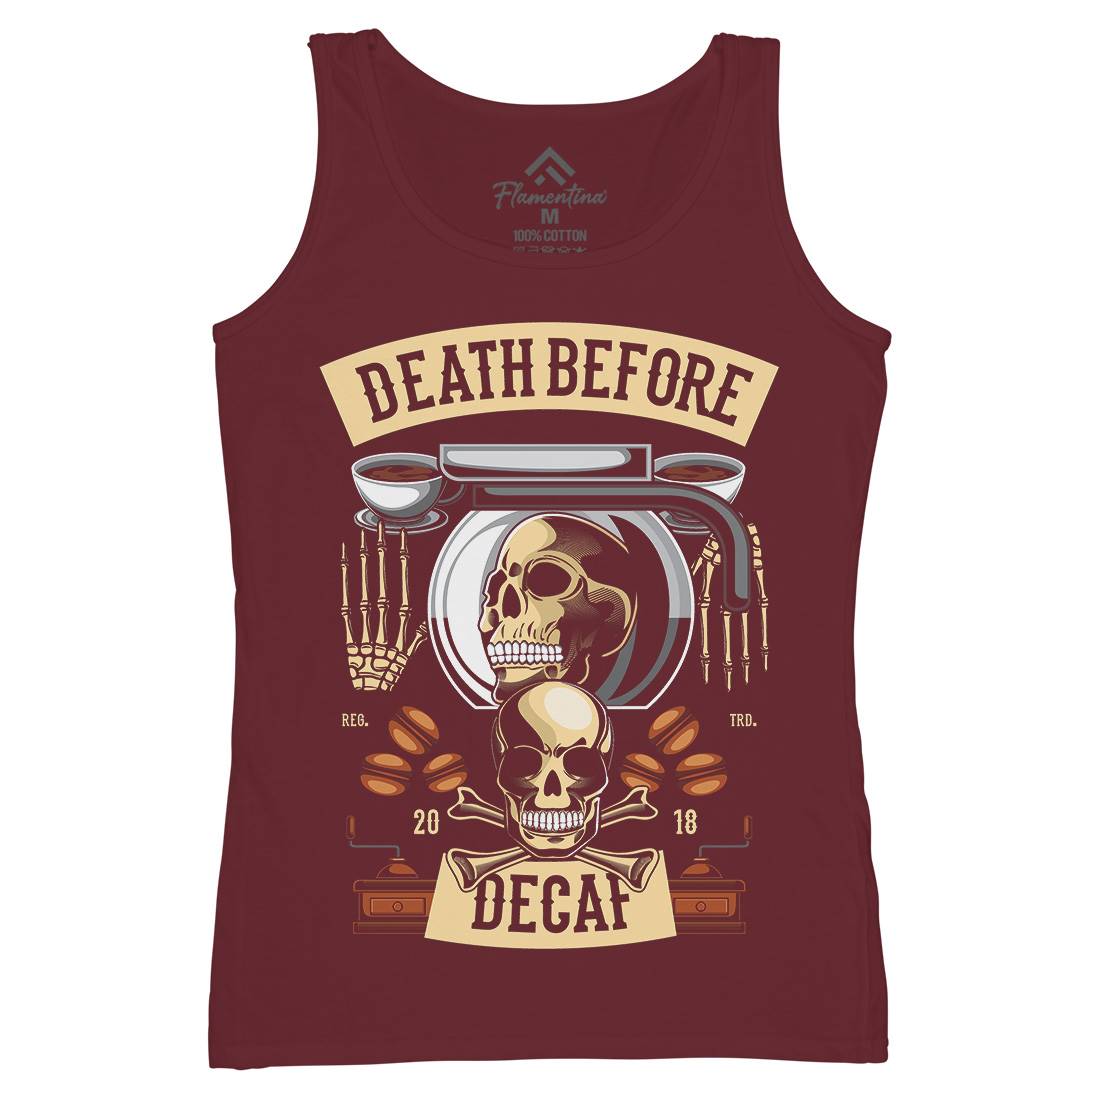 Death Before Decaf Womens Organic Tank Top Vest Drinks C335